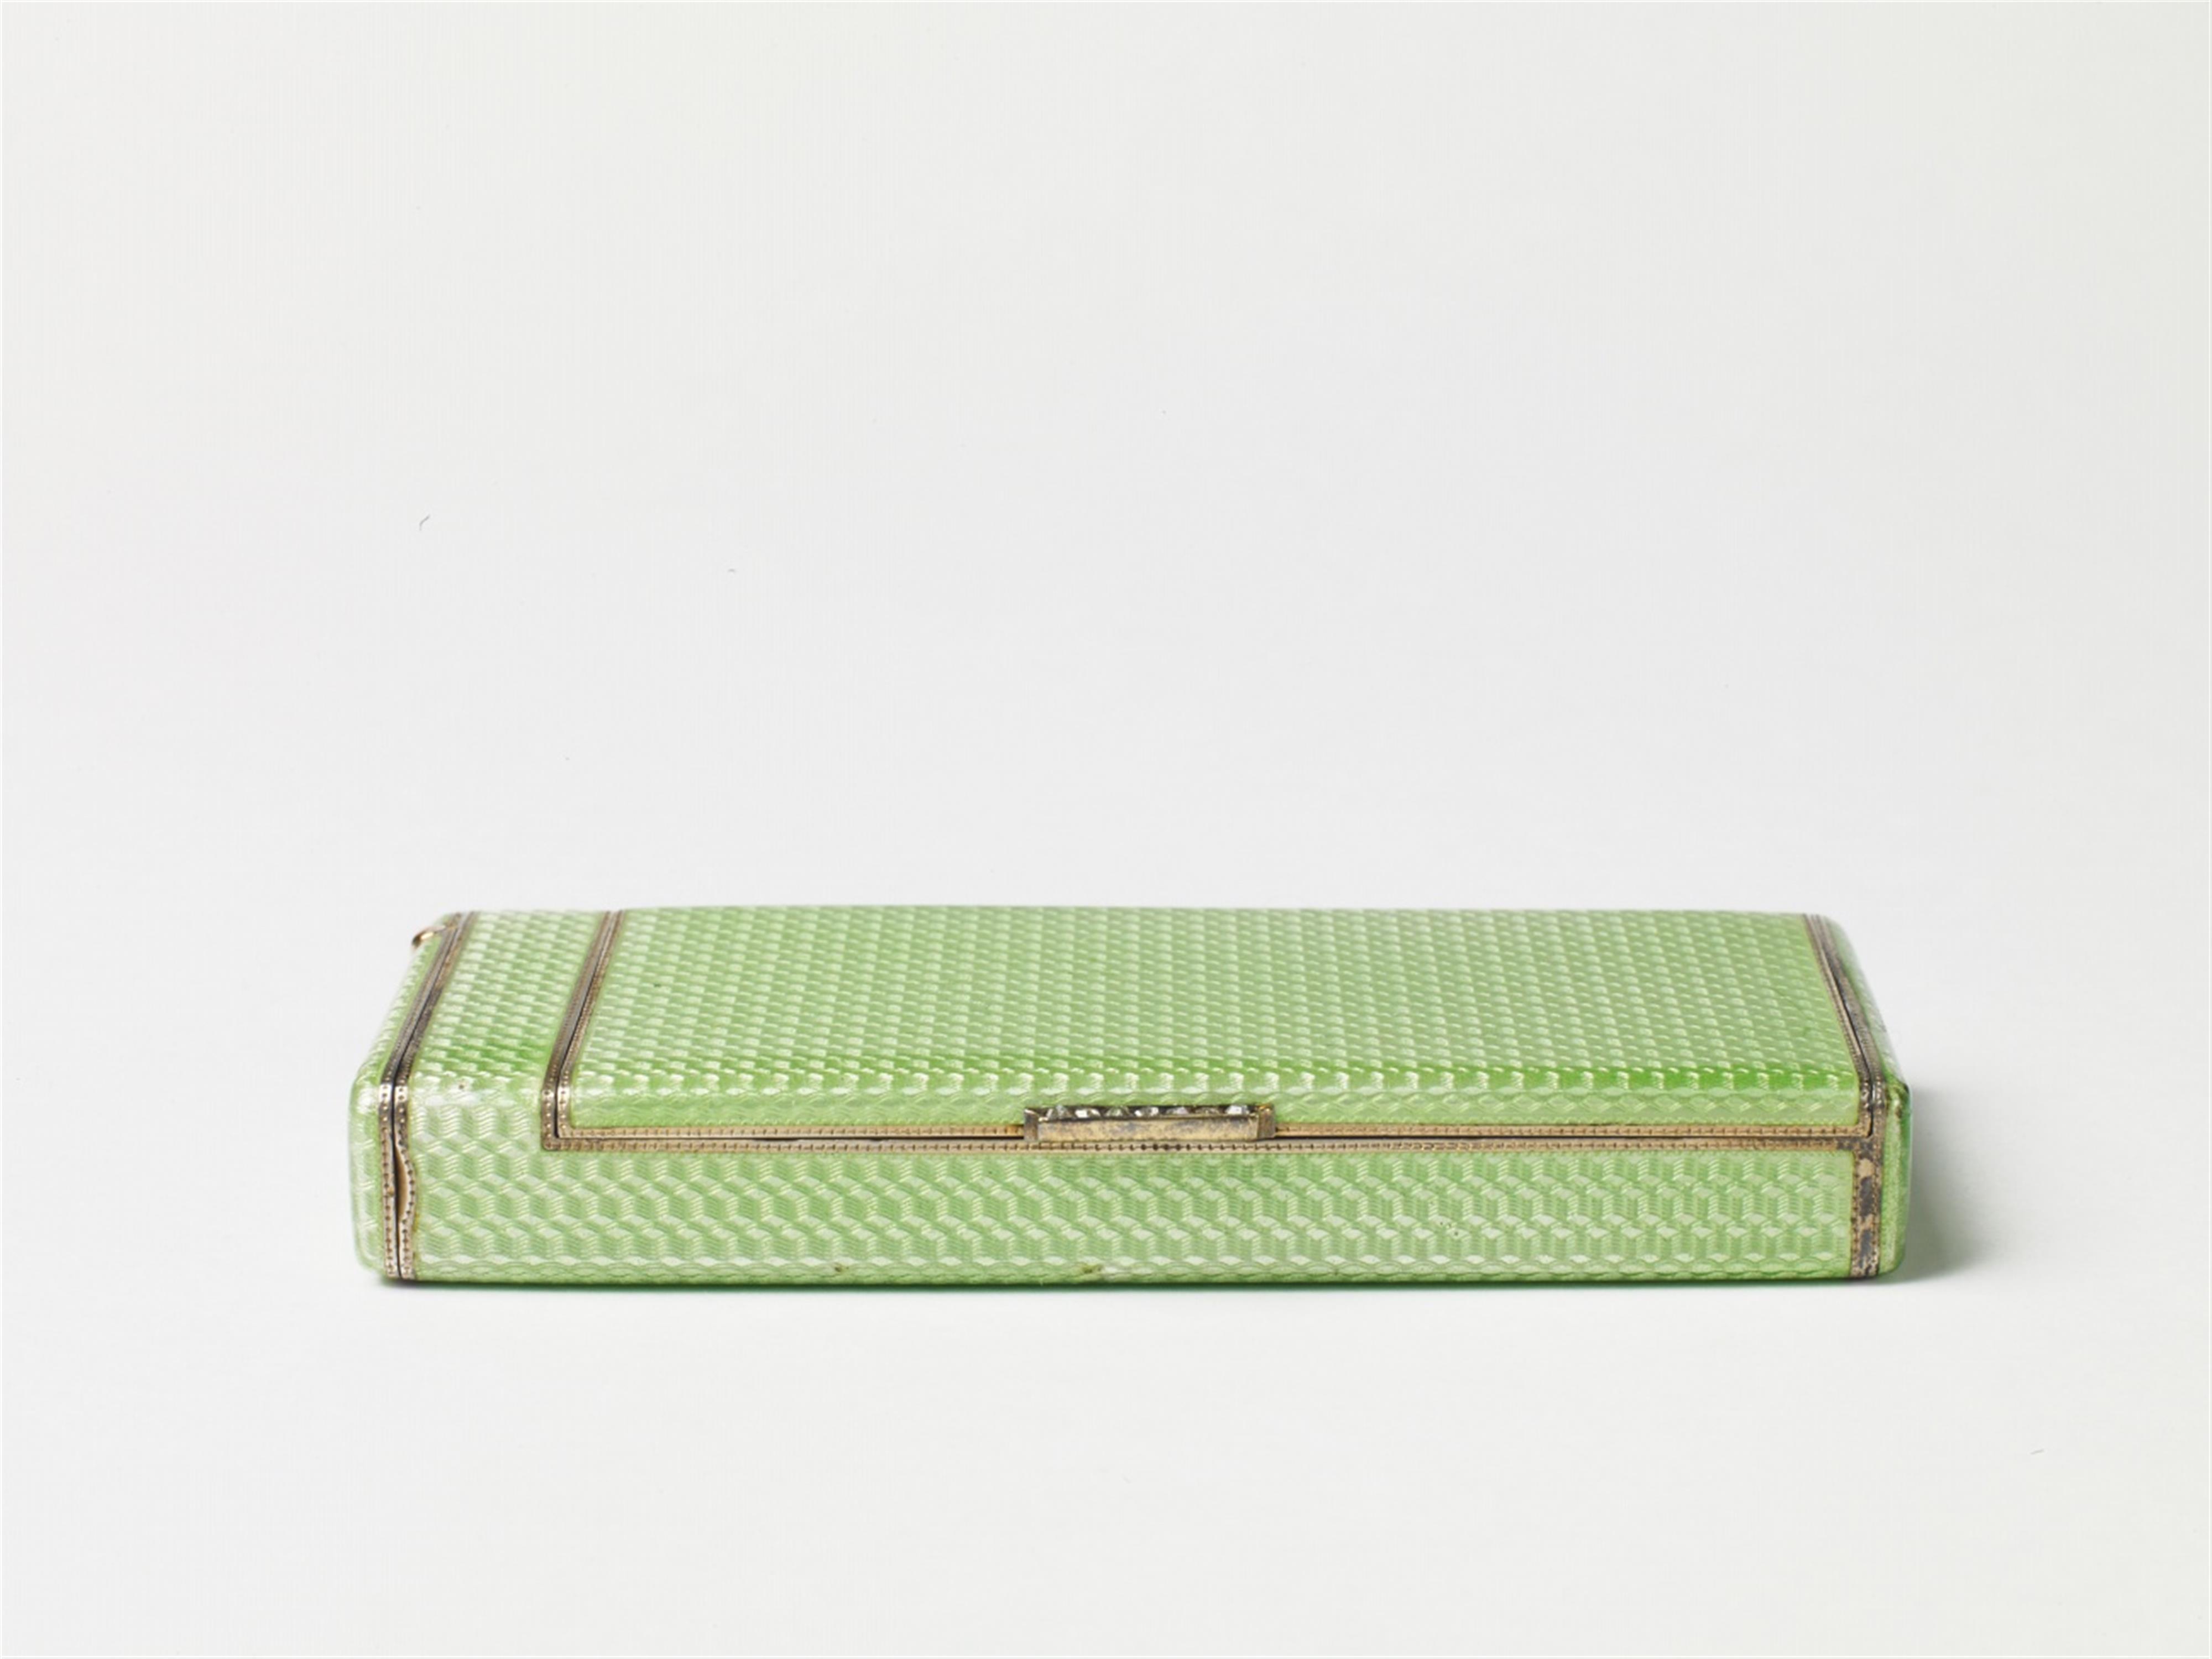 A St. Petersburg silver gilt and translucent enamel cigarette case with marks of Ivan Savelewitsch Britzin - image-1